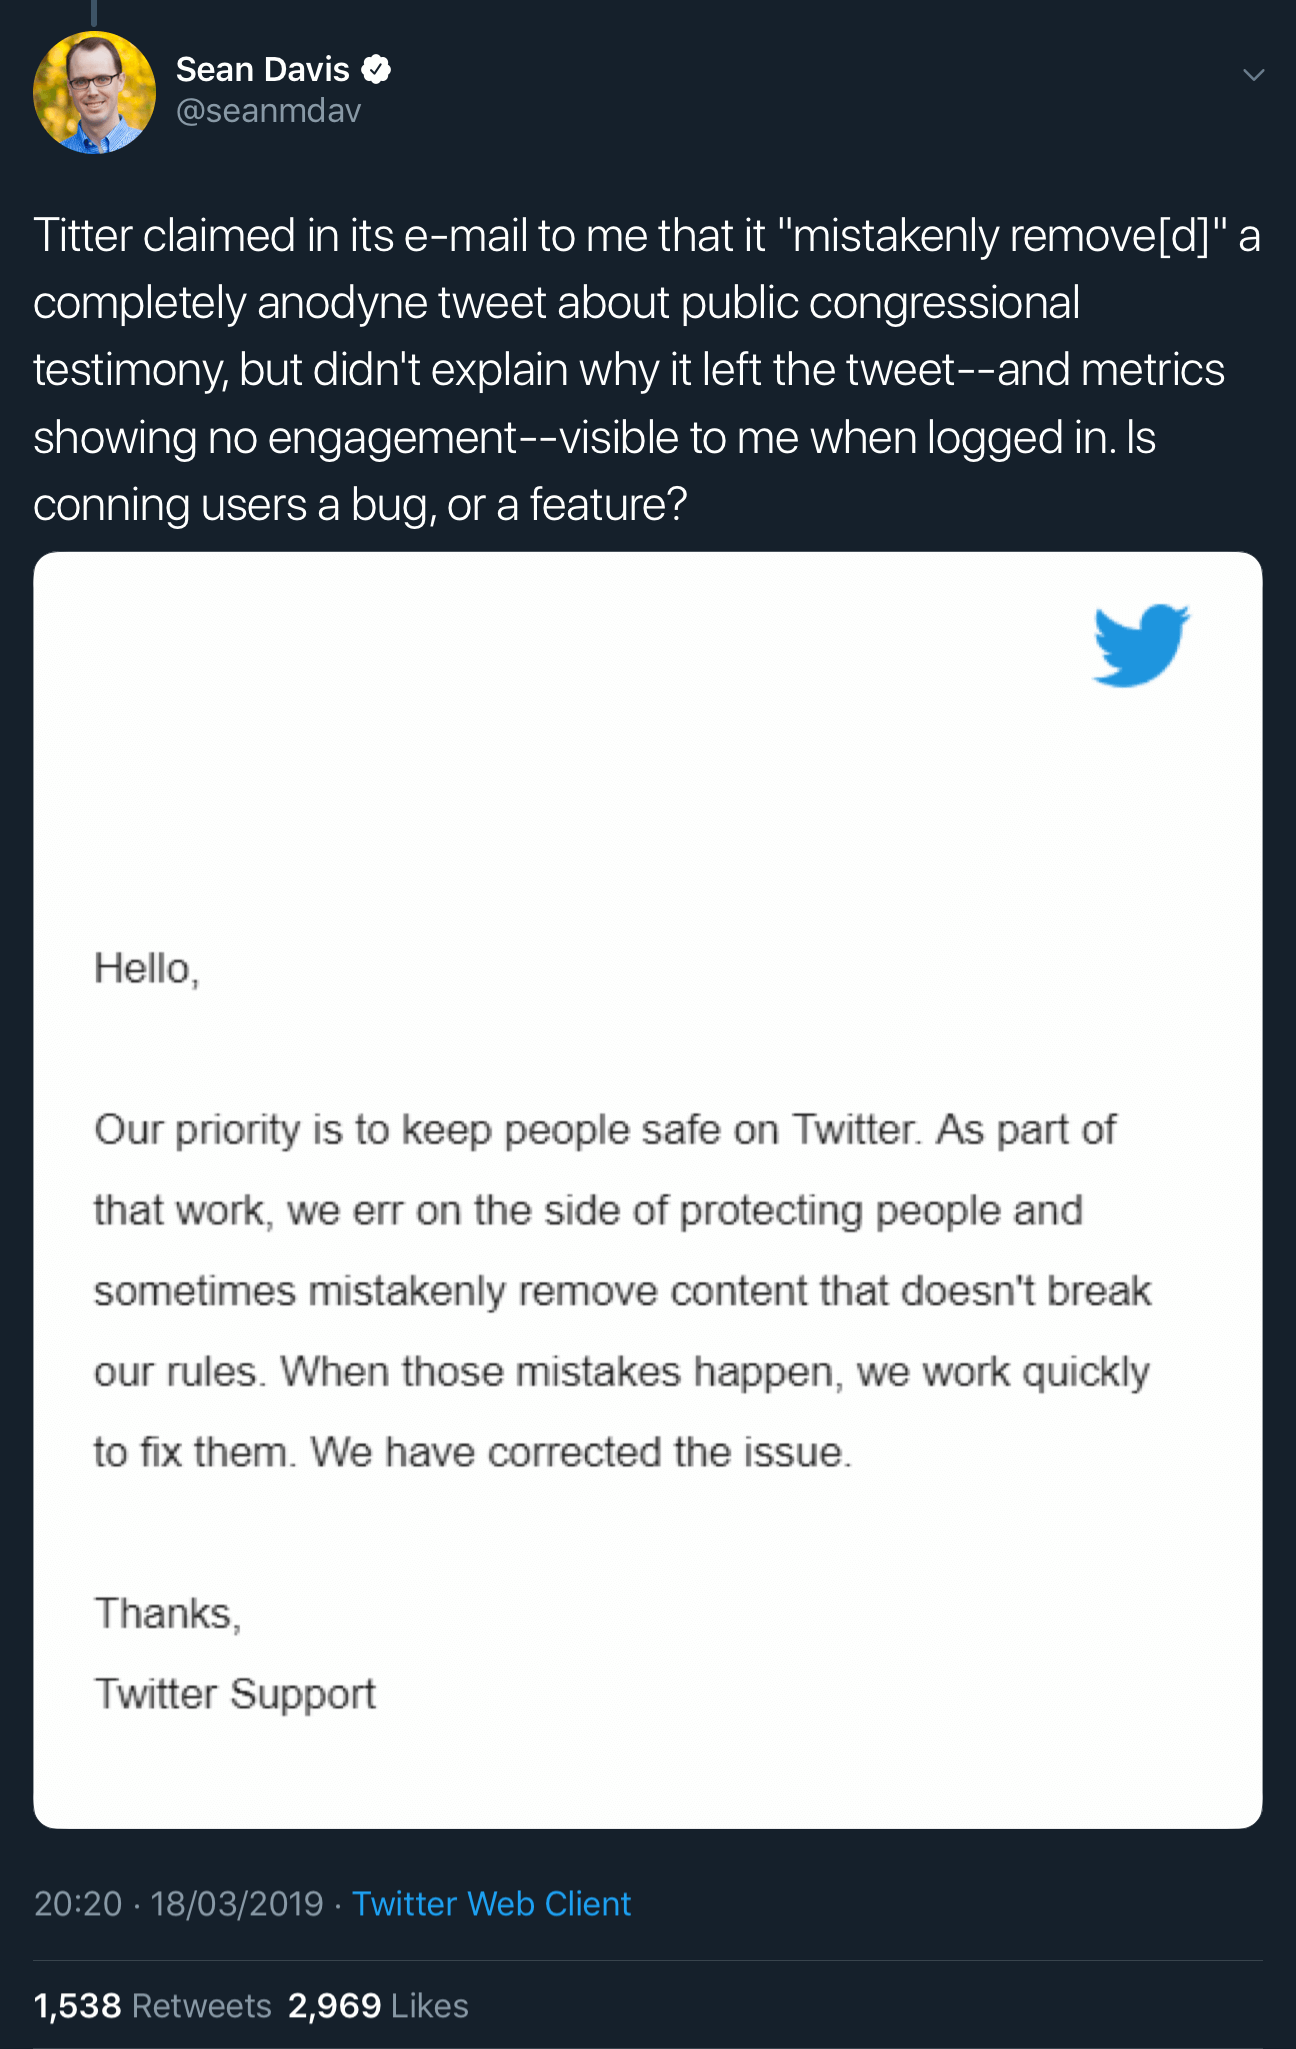 Sean Davis’ tweet showing the email from Twitter which seems to confirm the shadowban.